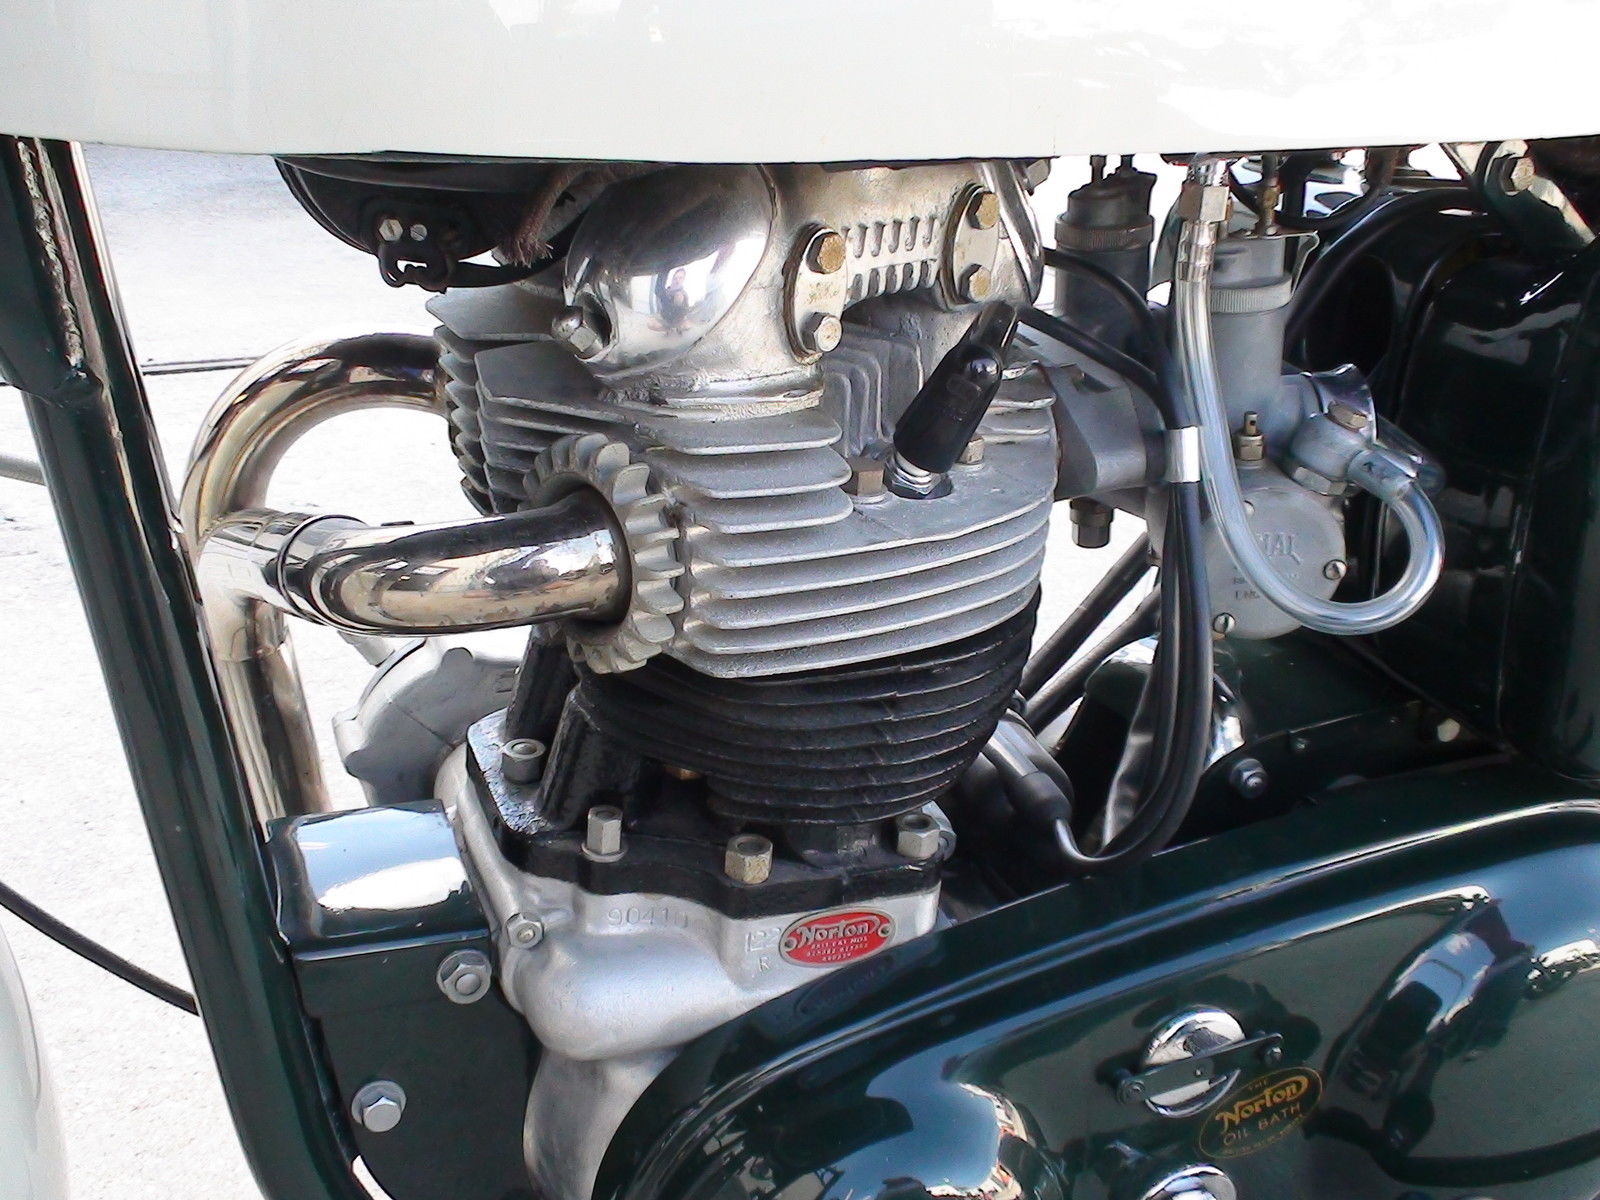 Norton Dominator 88 - 1960 - Siamese Exhaust System, Cylinder Head, Chain Cover and Spark Plug.